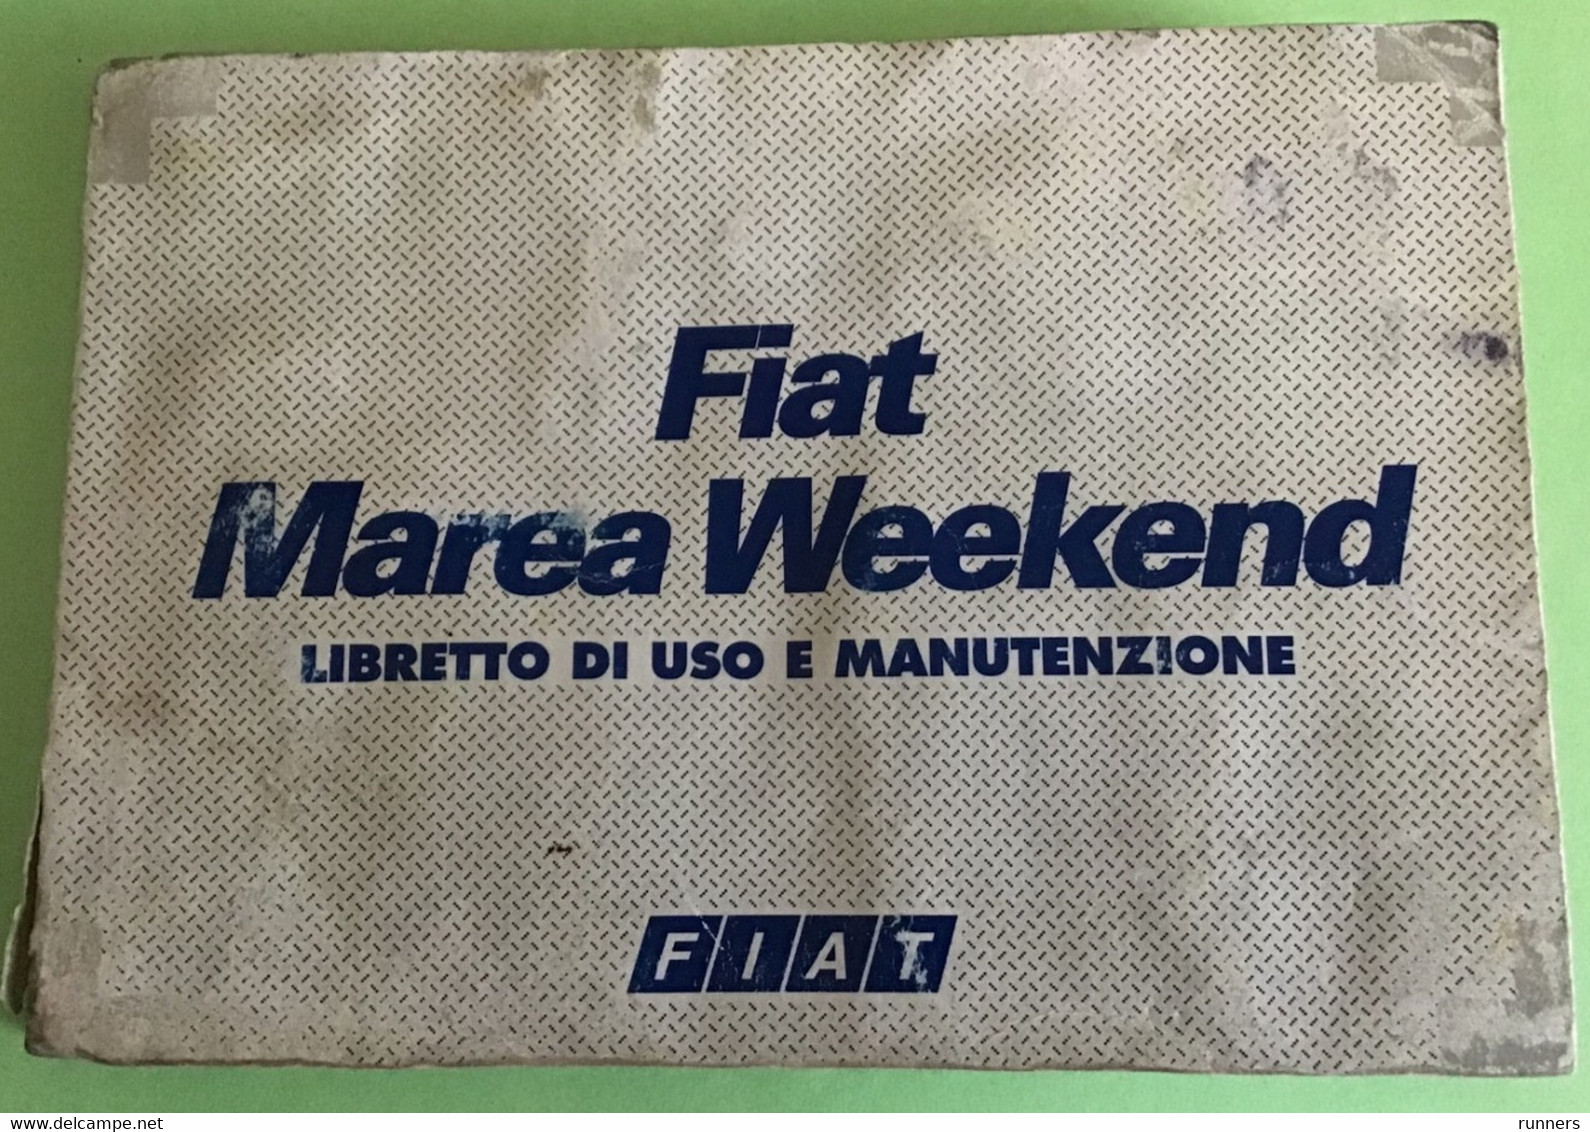 Fiat Manuale Marea Weekend Auto - Supplies And Equipment